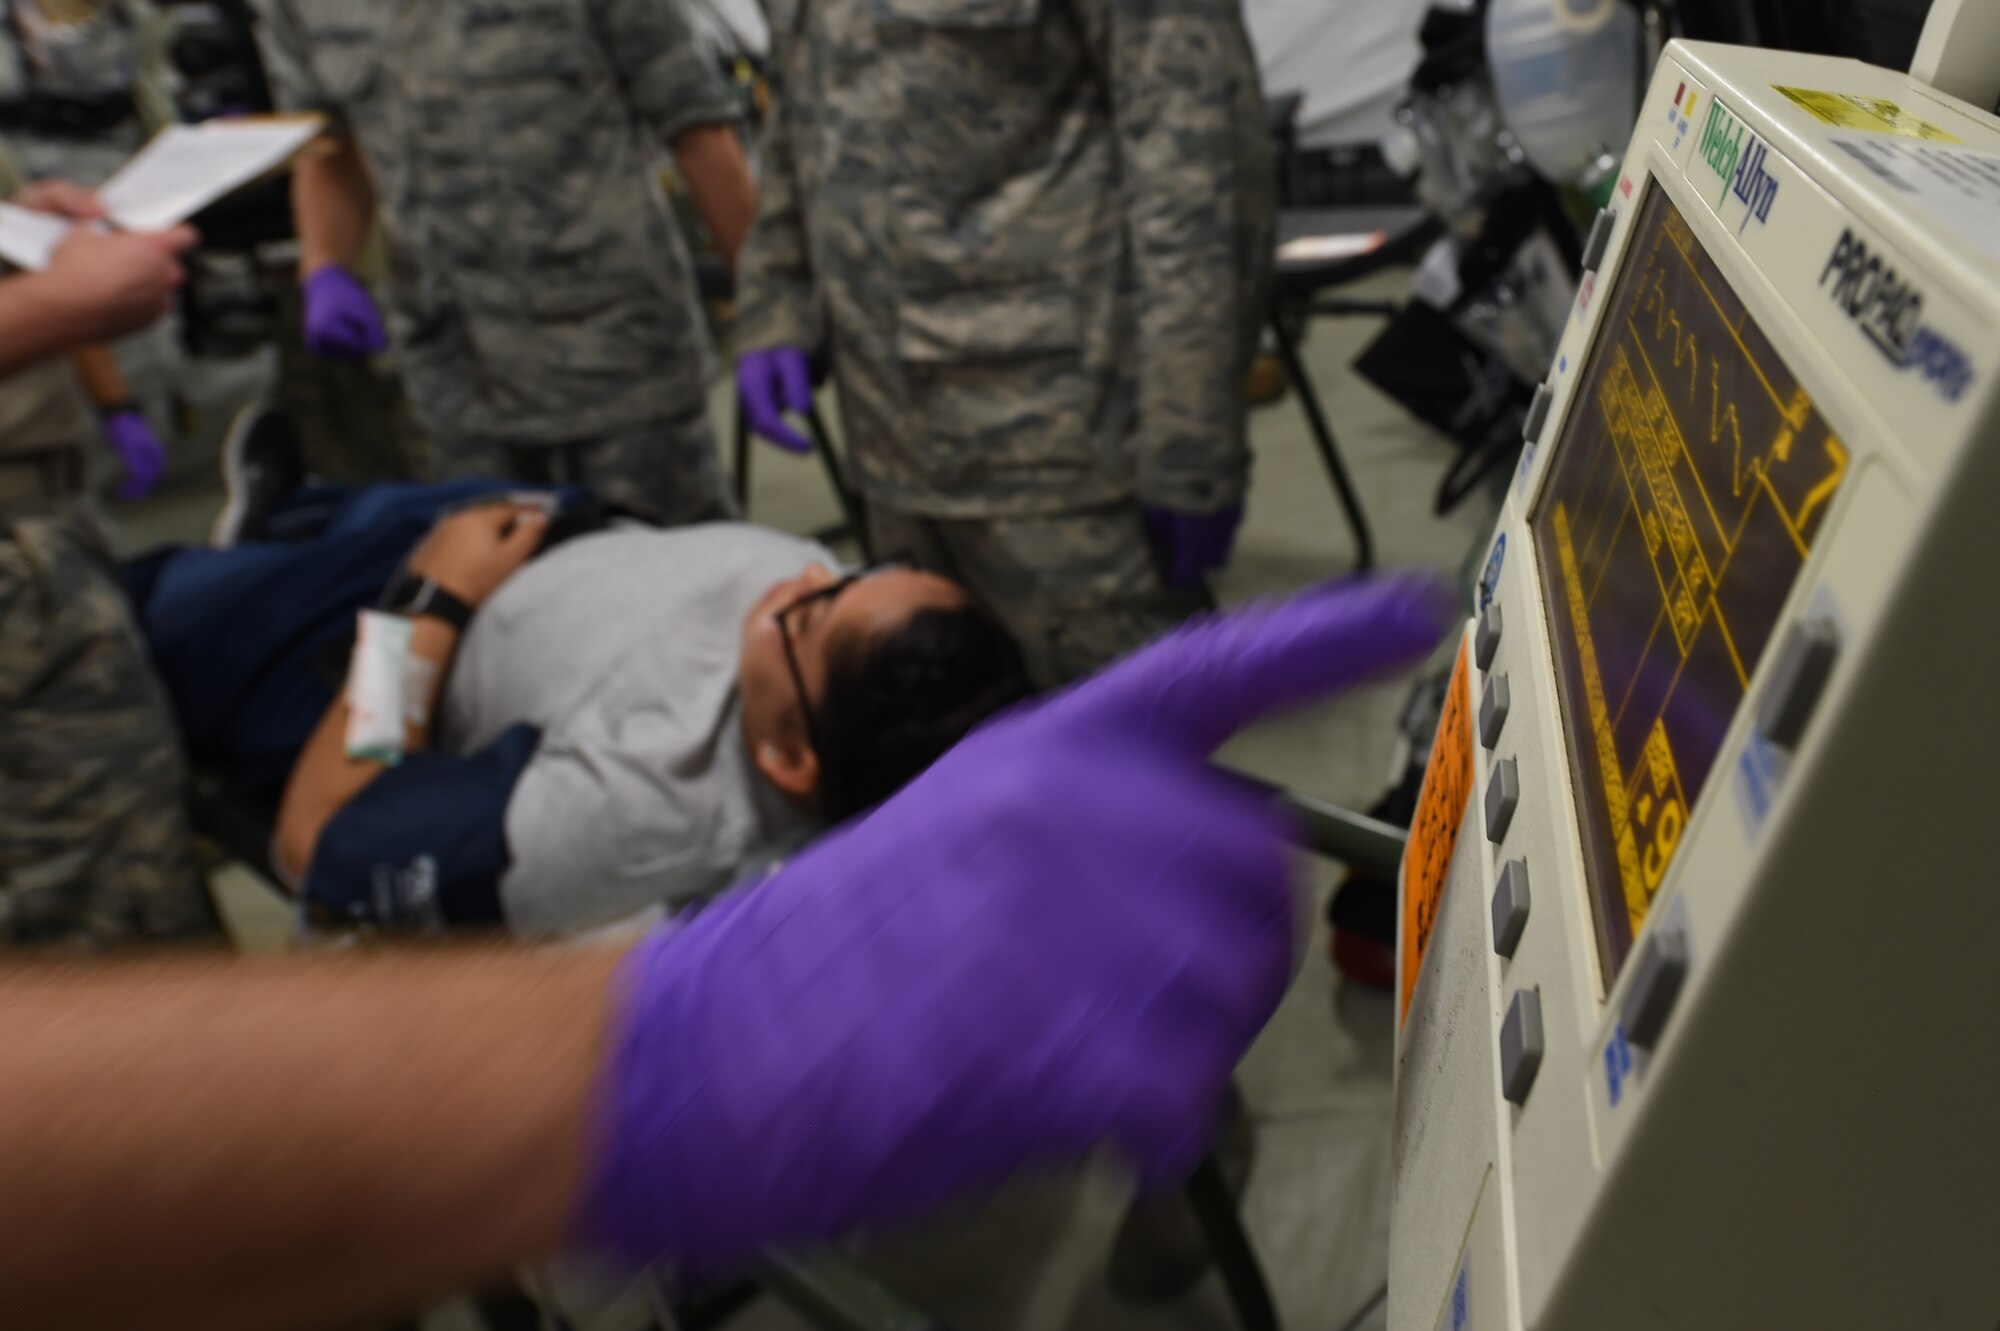 An emergency room technician checks a patients vitals during the 633rd Medical Group’s global response force training exercise at Joint Base Langley-Eustis, Va., Oct. 20, 2016. In a real-world global response scenario the field hospital, the medical group trained in, can provide care for a population of 6,500. (U.S. Air Force photo by Staff Sgt. Natasha Stannard)